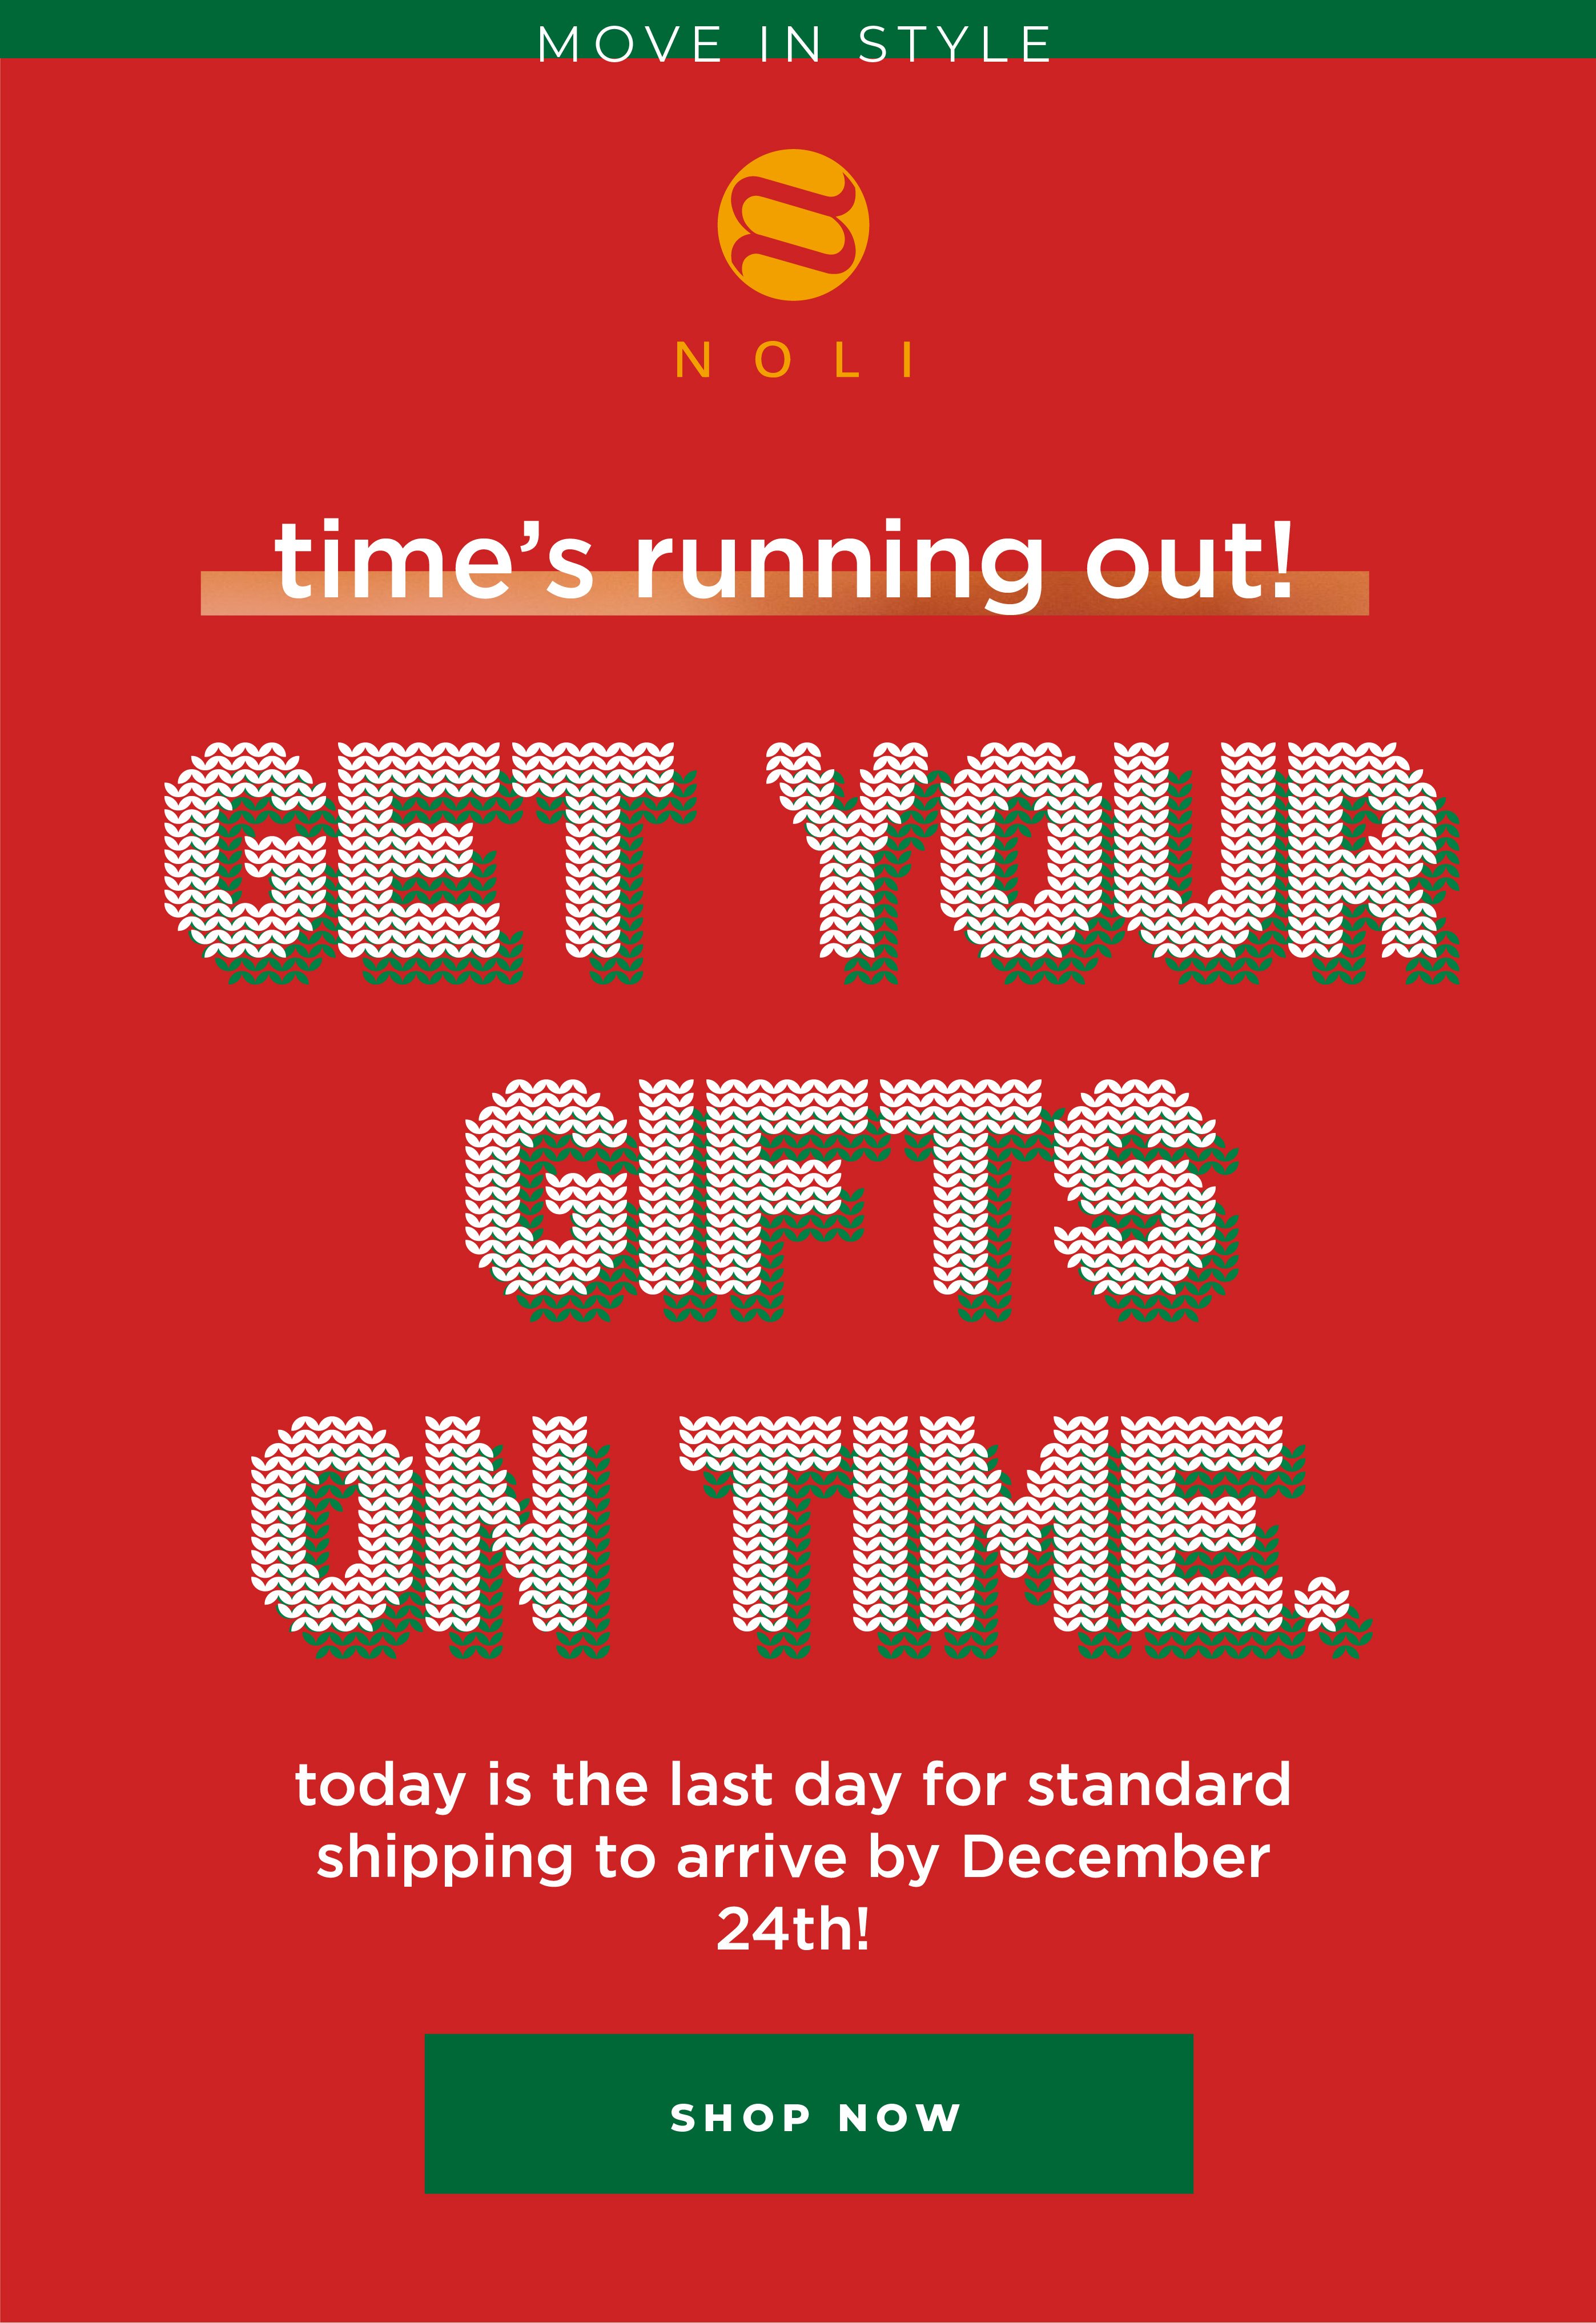 time's running out! get your gifts on time - order today